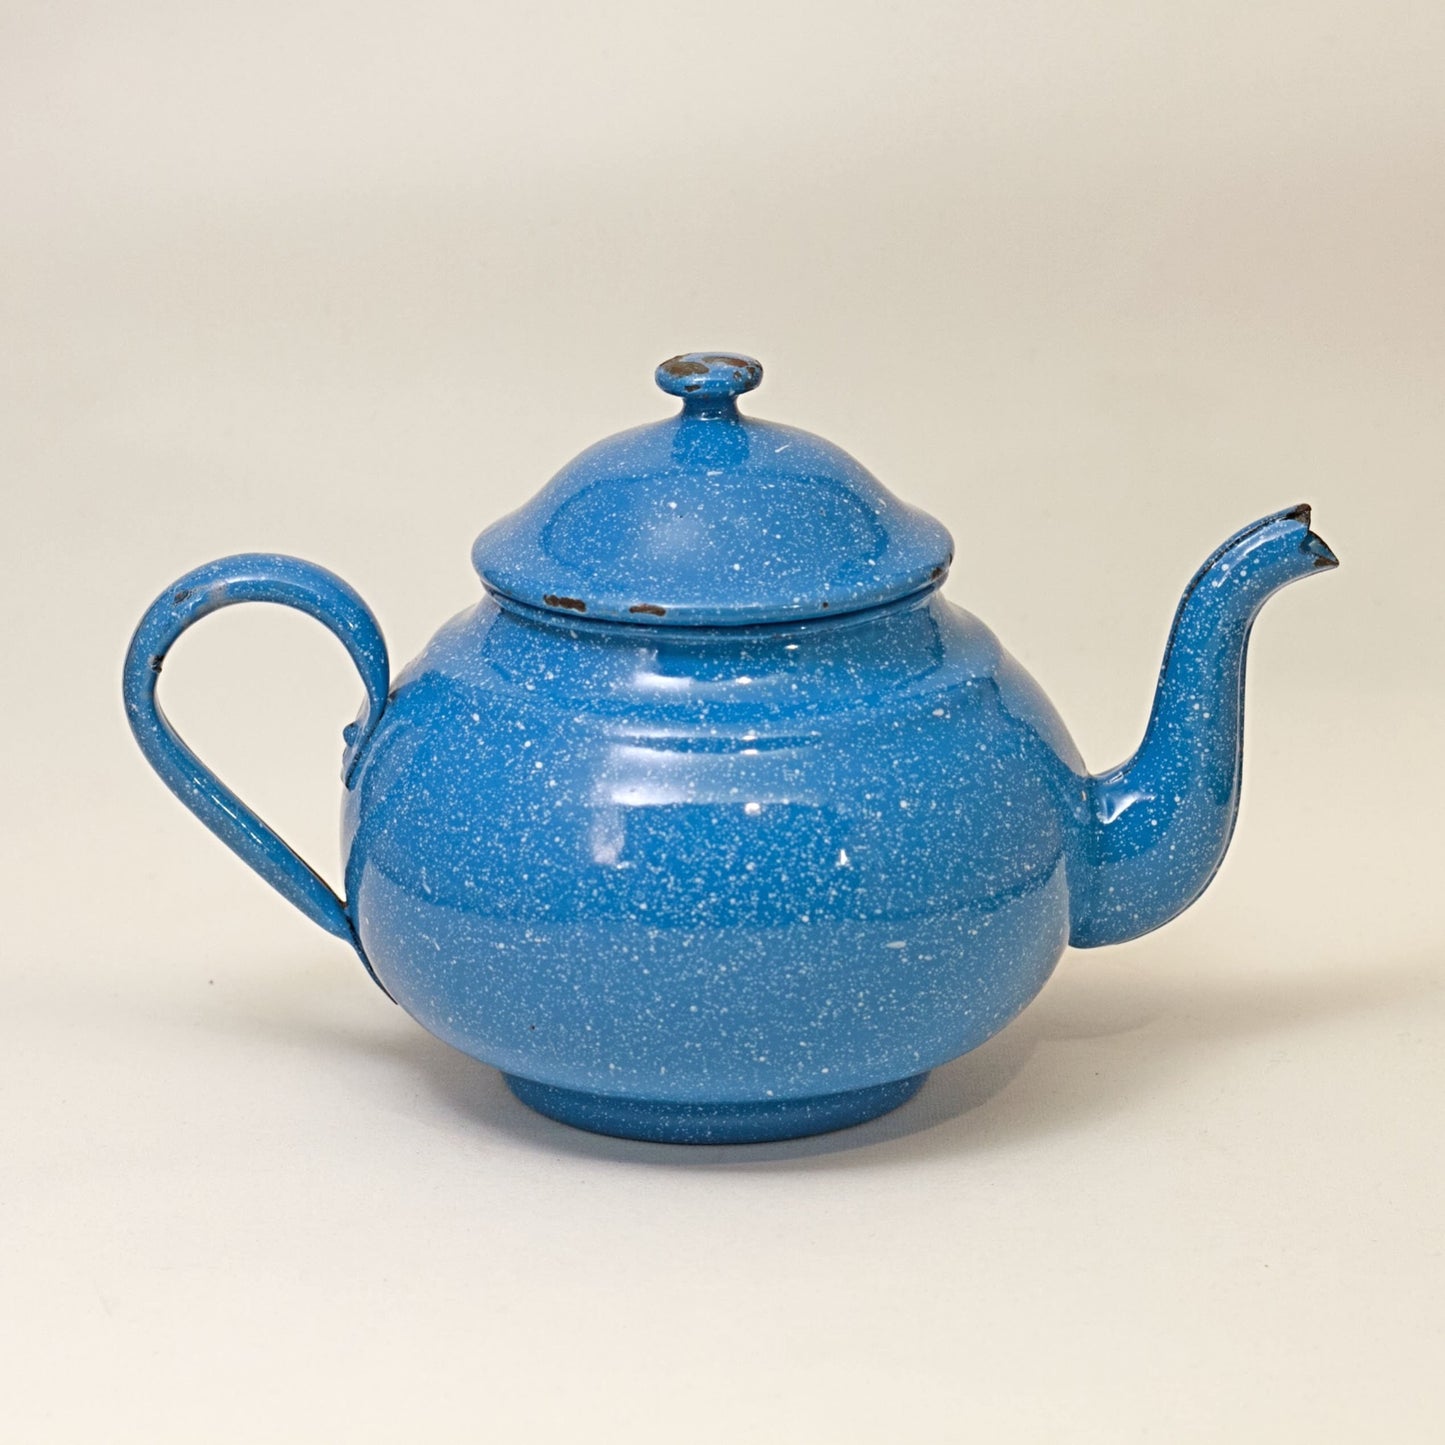 GRANITEWARE TEA KETTLE Blue and White Speckled Early 20th Century